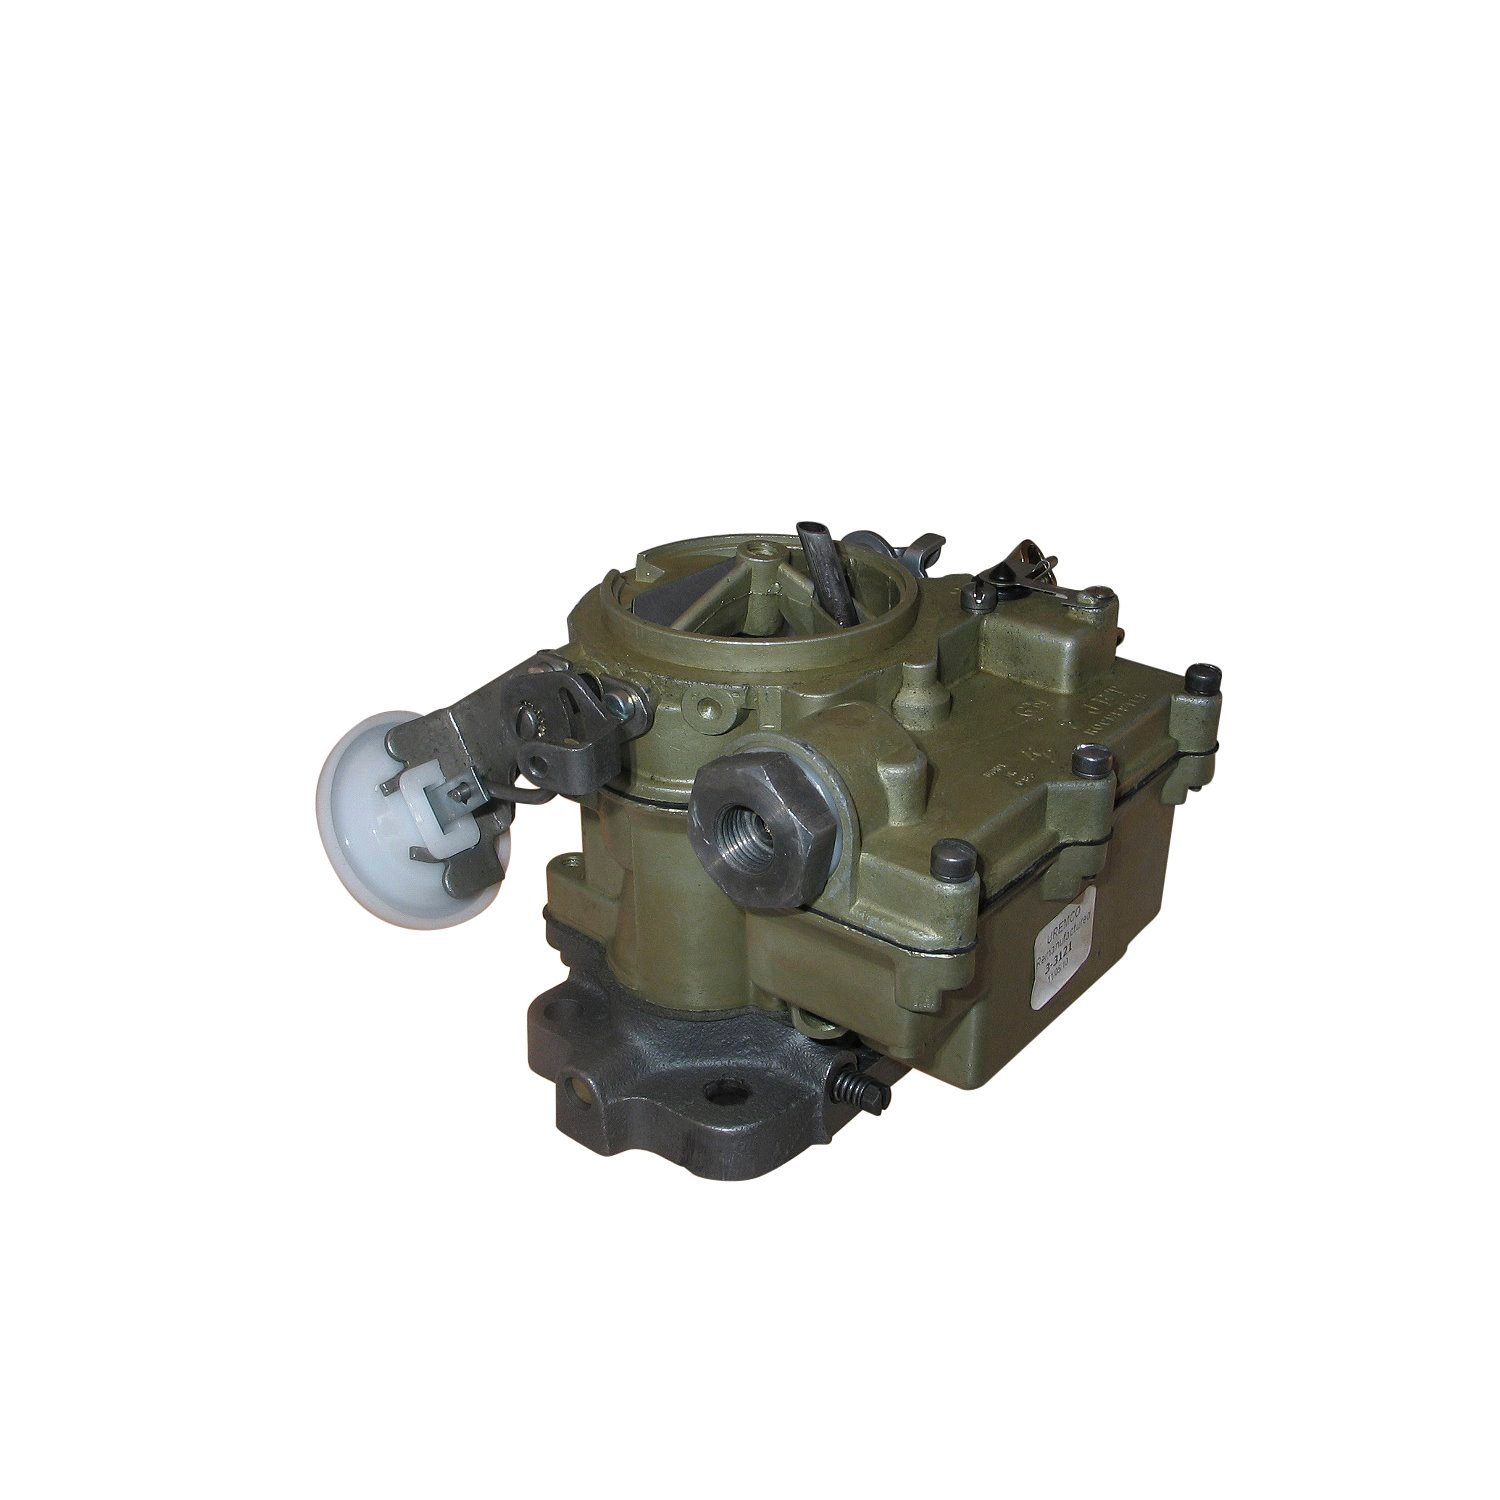 3-3110 Rochester Remanufactured Carburetor, 2GC-Style